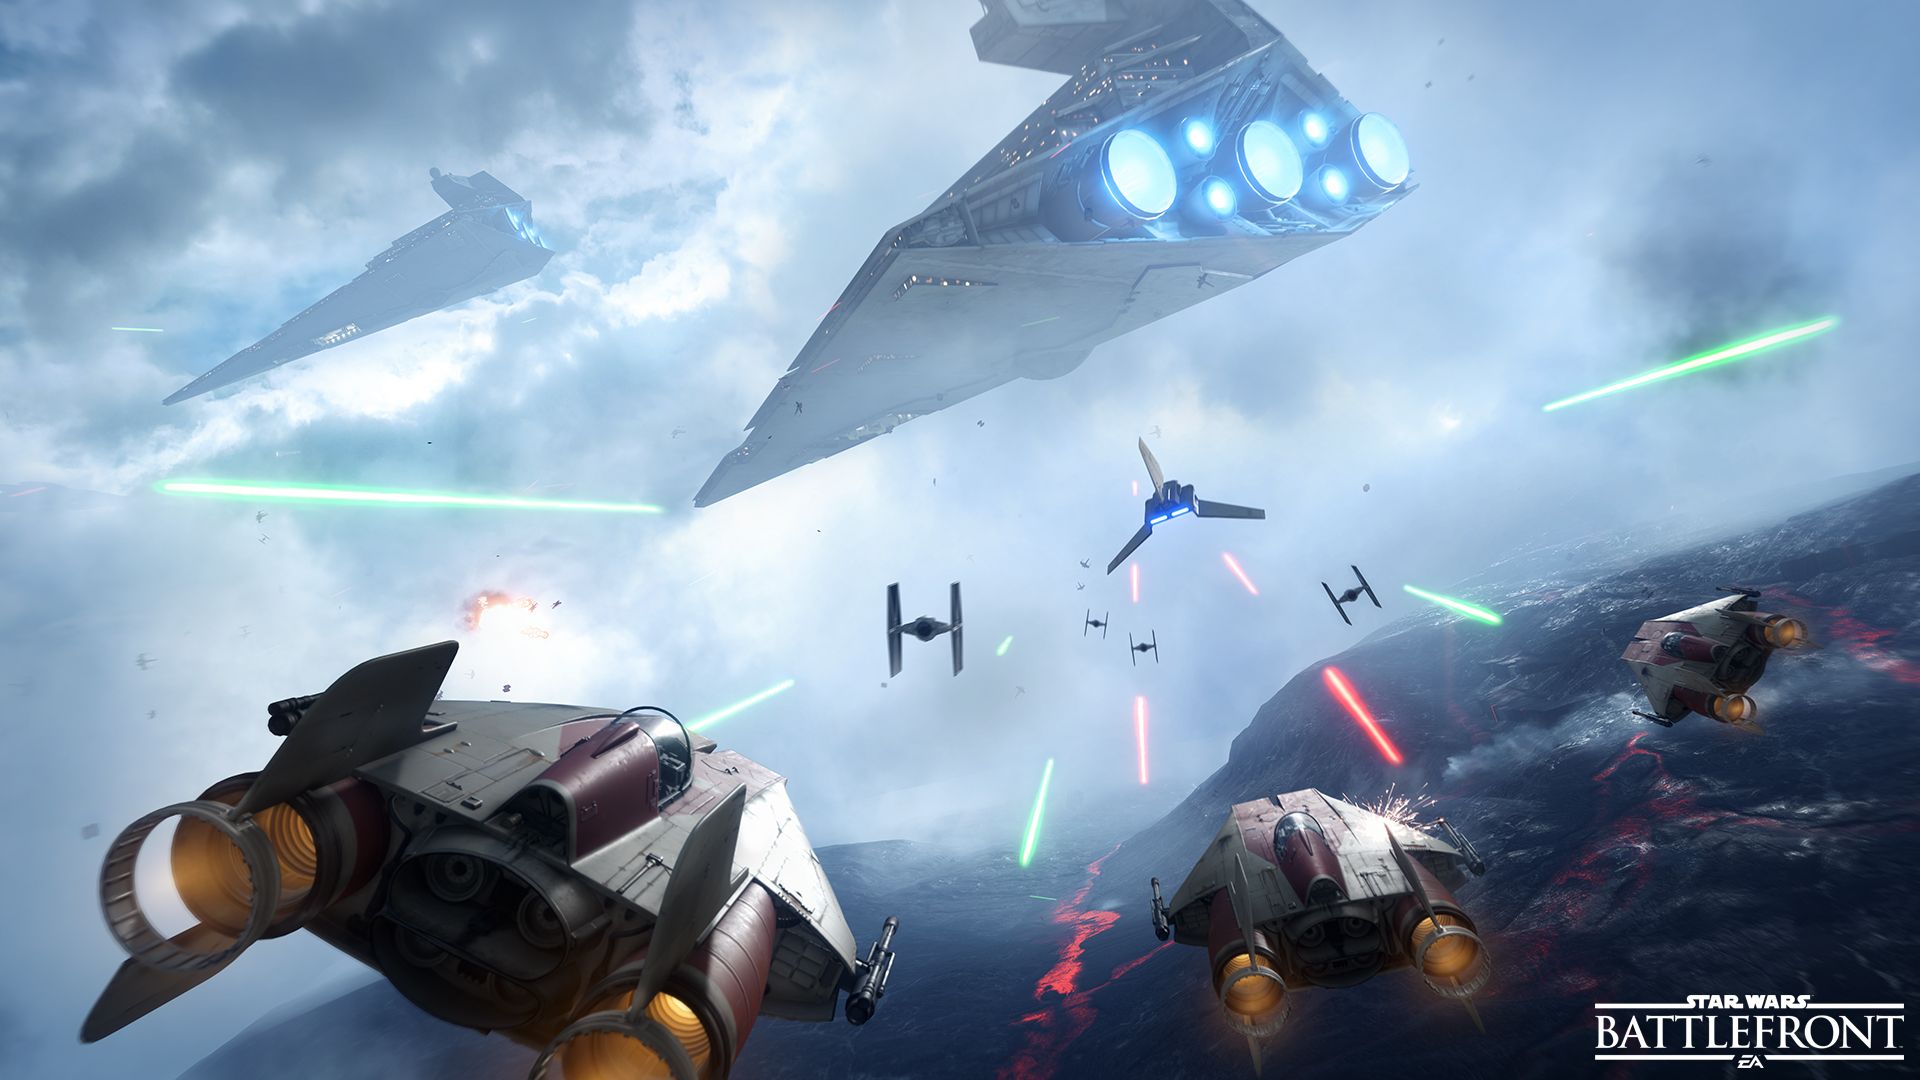 Star Wars: Battlefront Fighter Squadron Mode - A-Wing vs Imperials